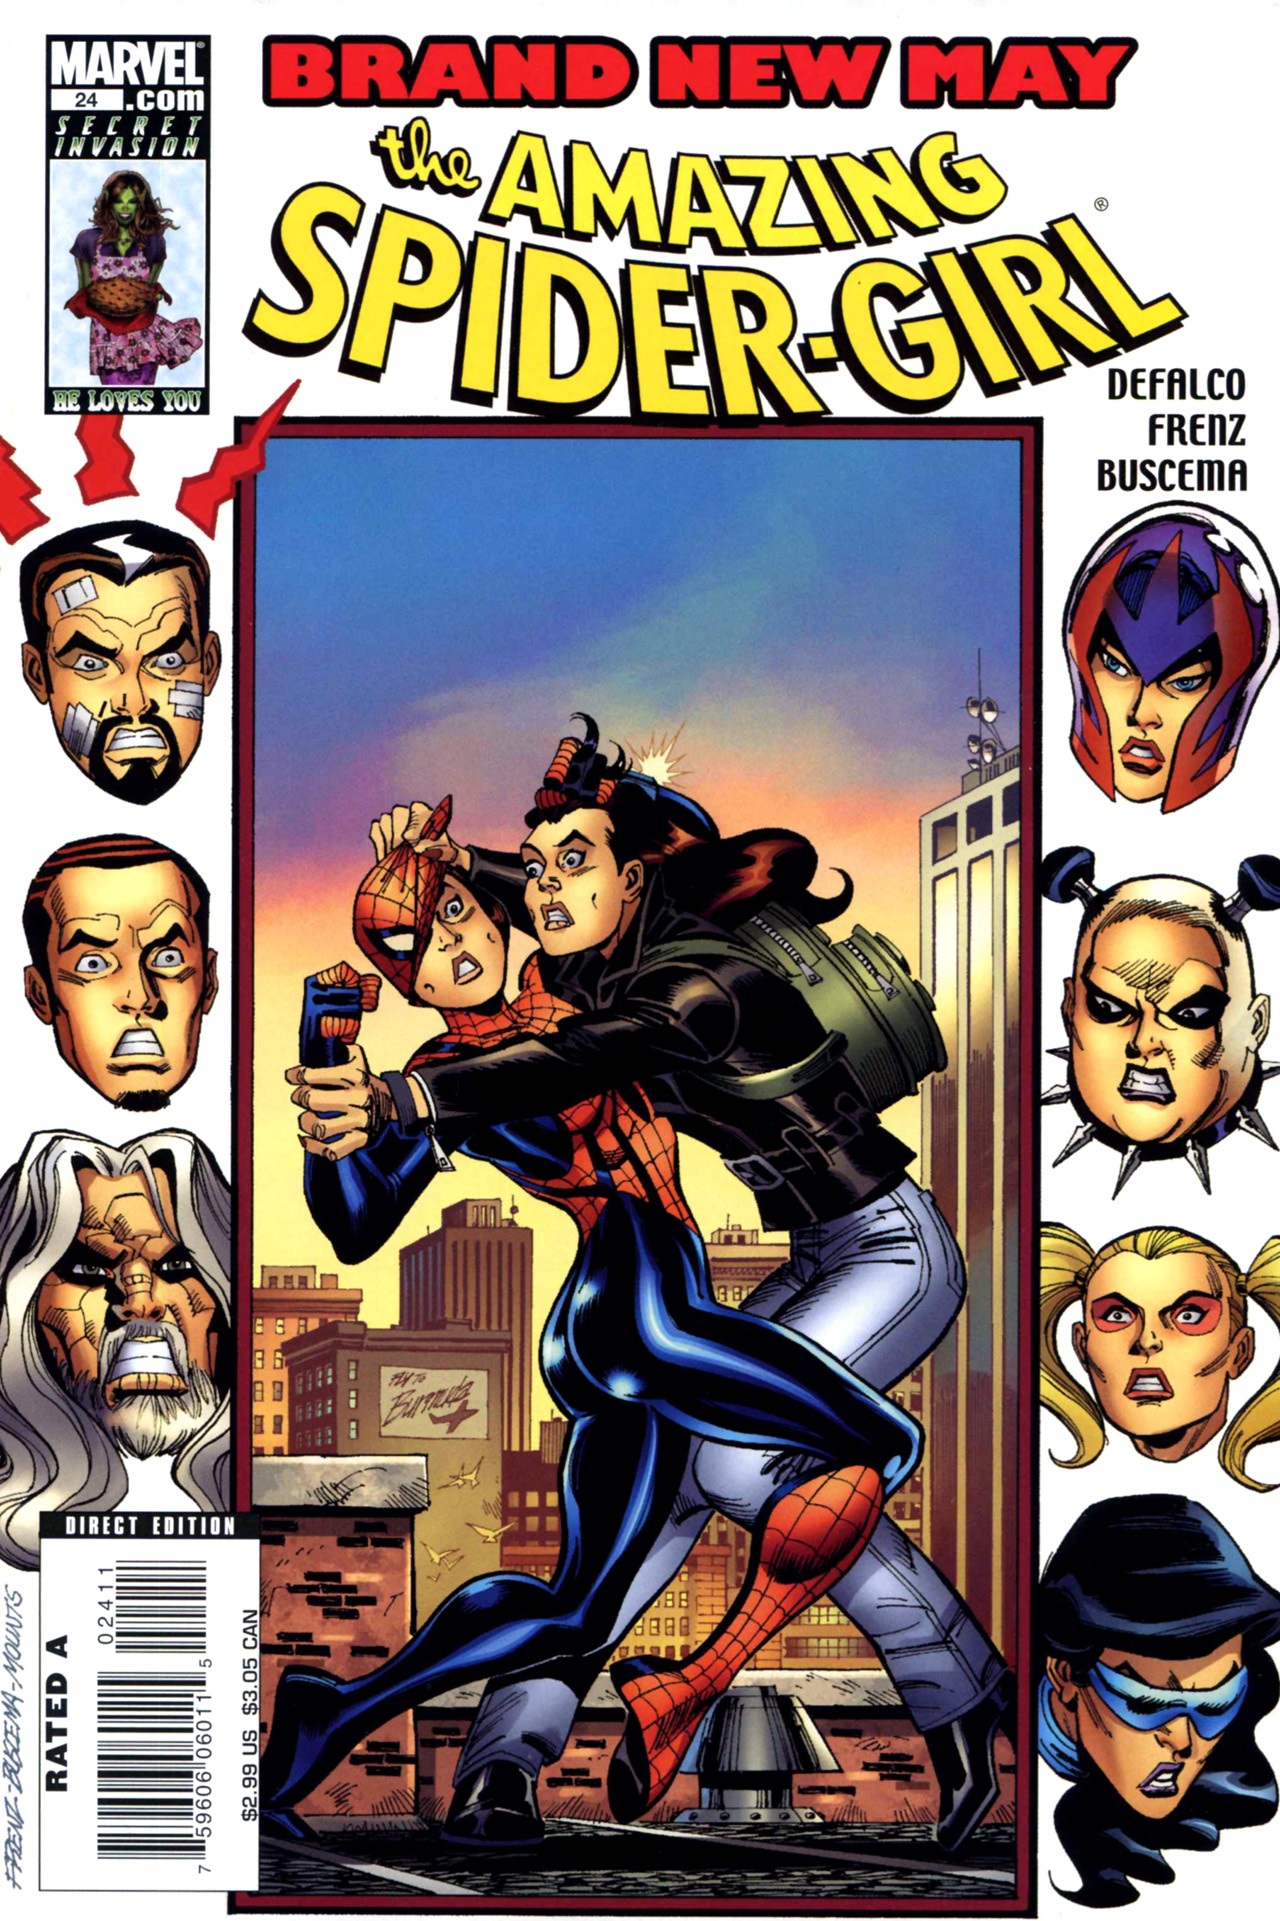 Read online Amazing Spider-Girl comic -  Issue #24 - 1